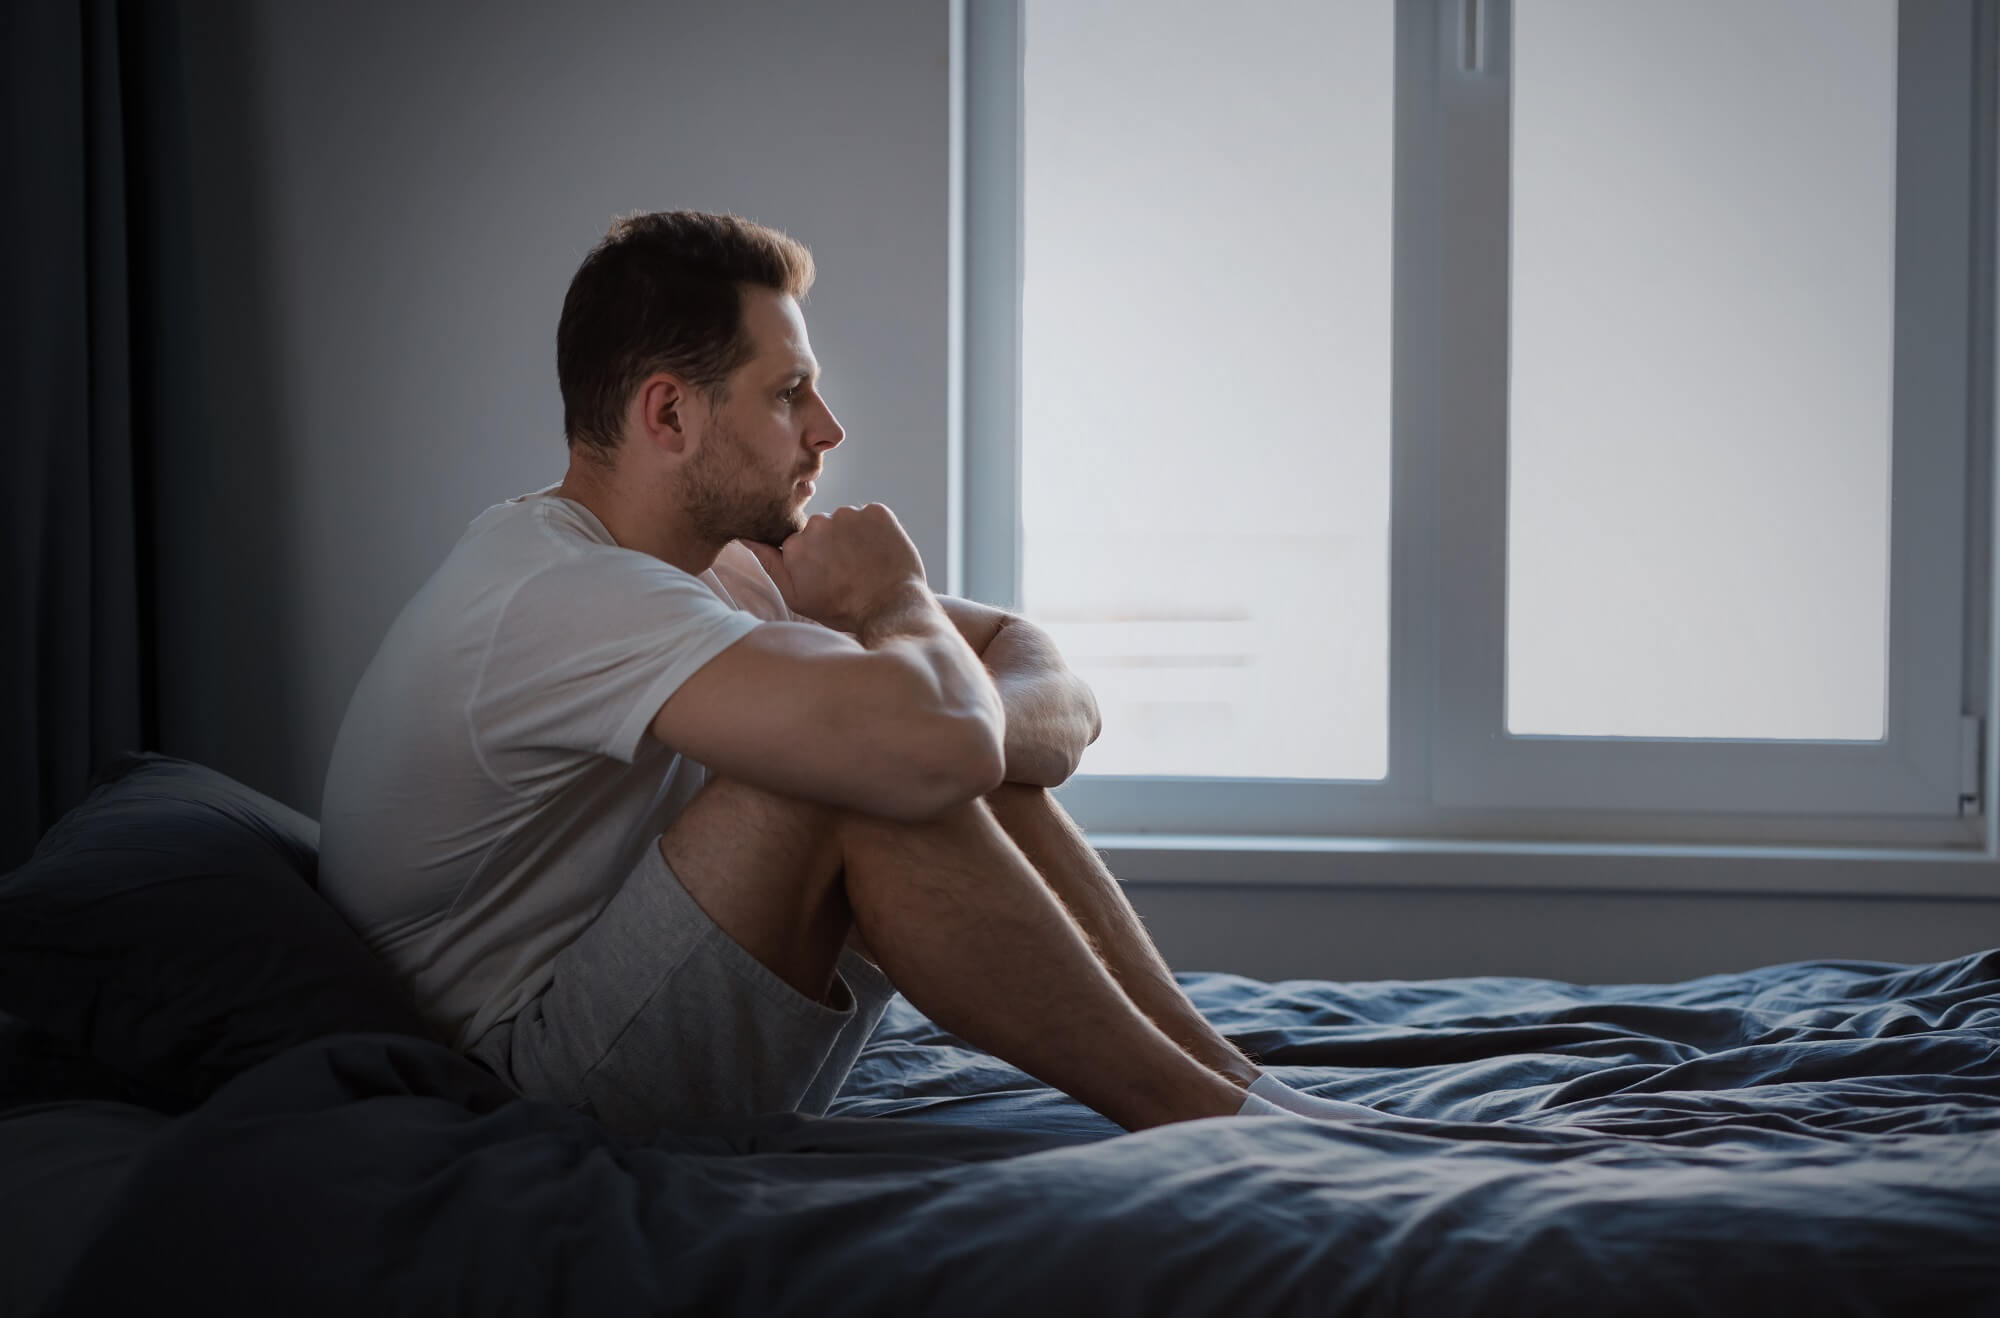 Depressed Man Thinking About Problems Sitting In Bed Indoors